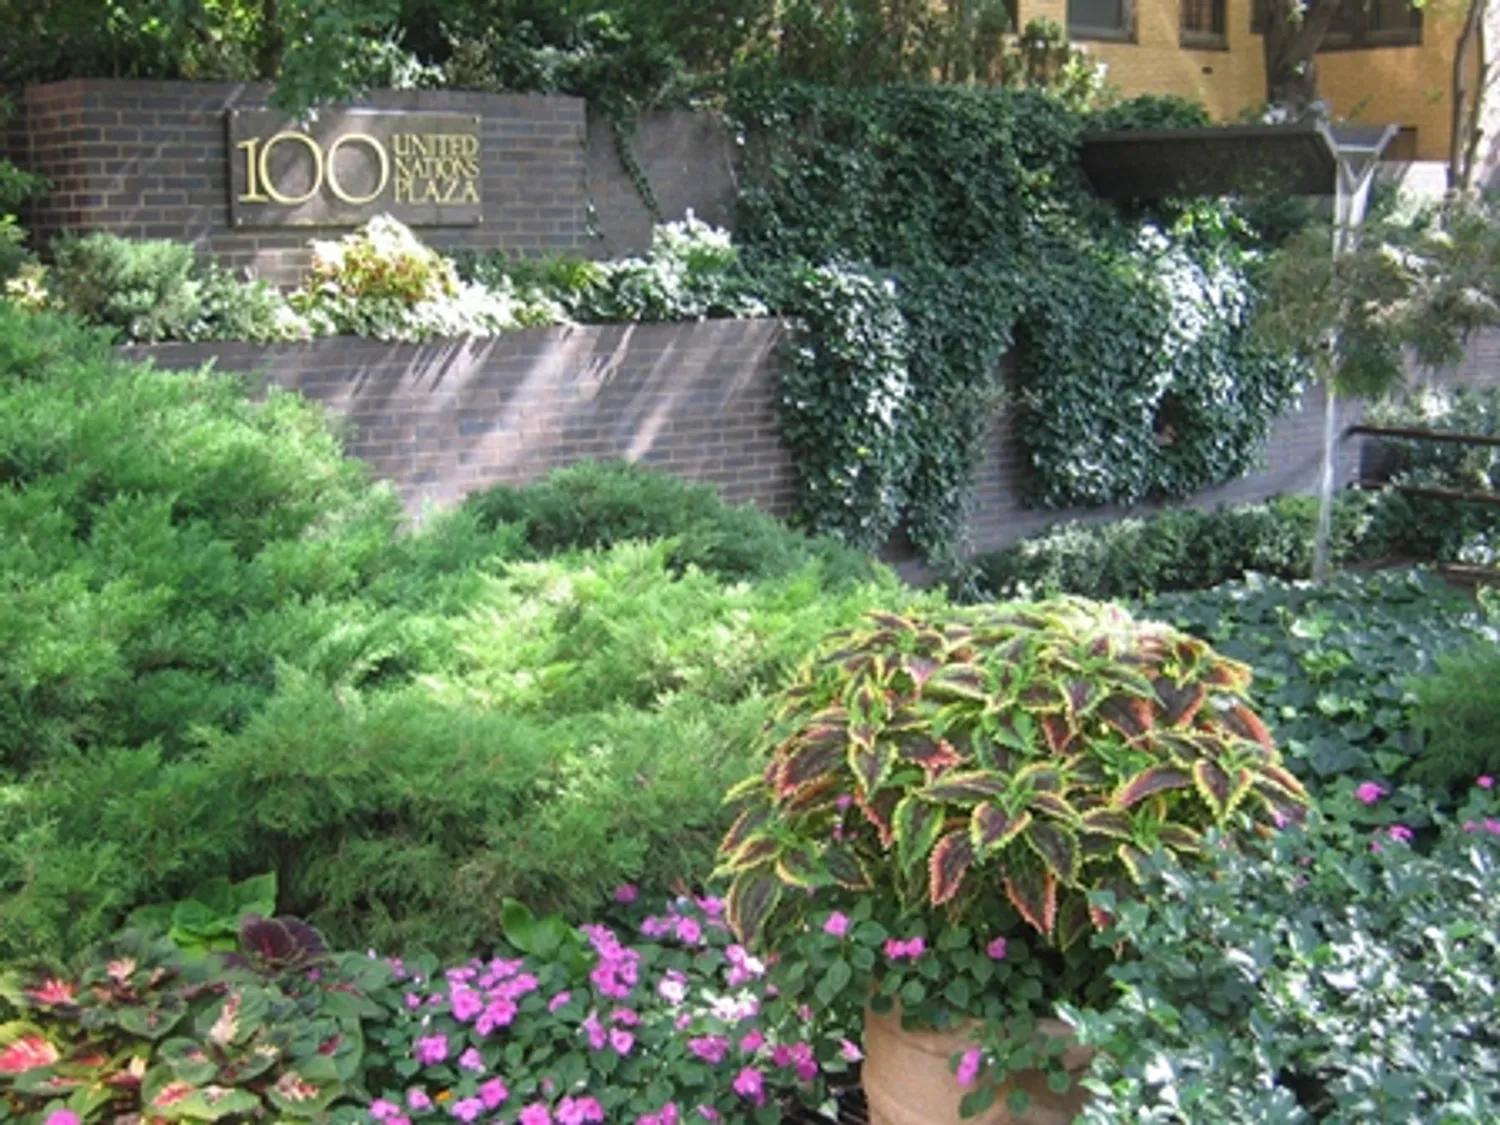 Some of the beautiful gardens at 100 UN Plaza